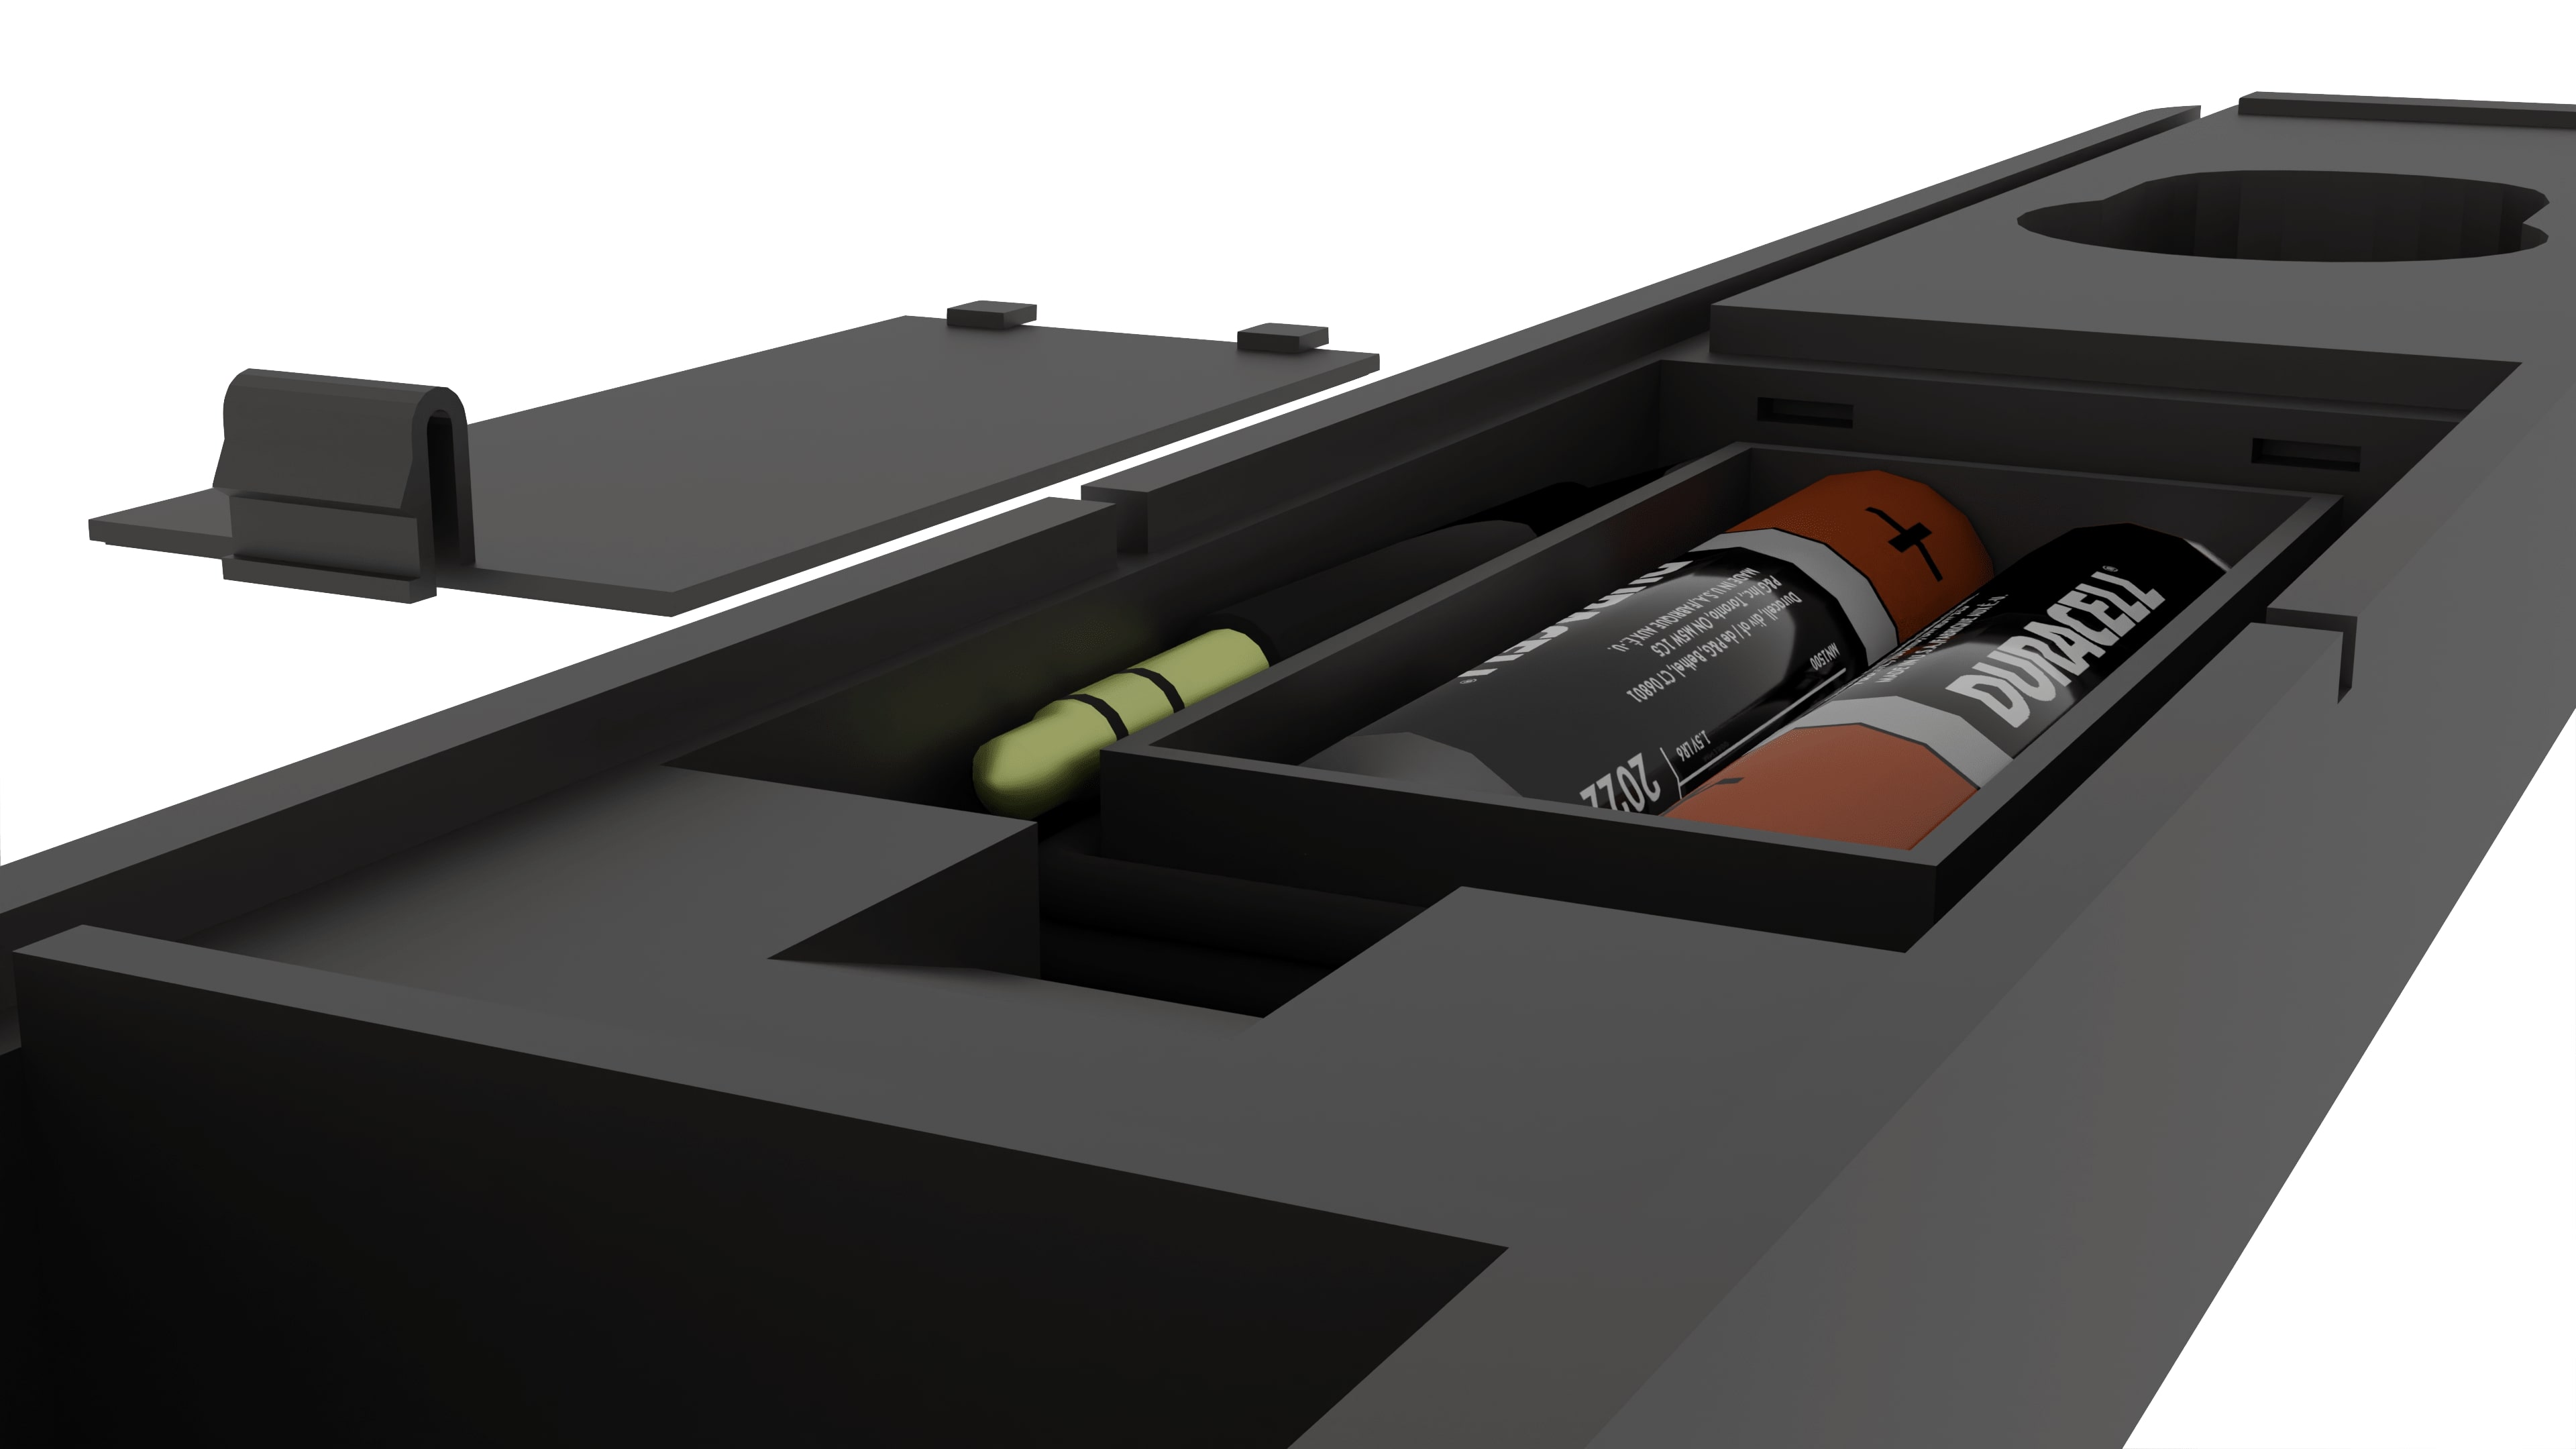 View inside battery compartment